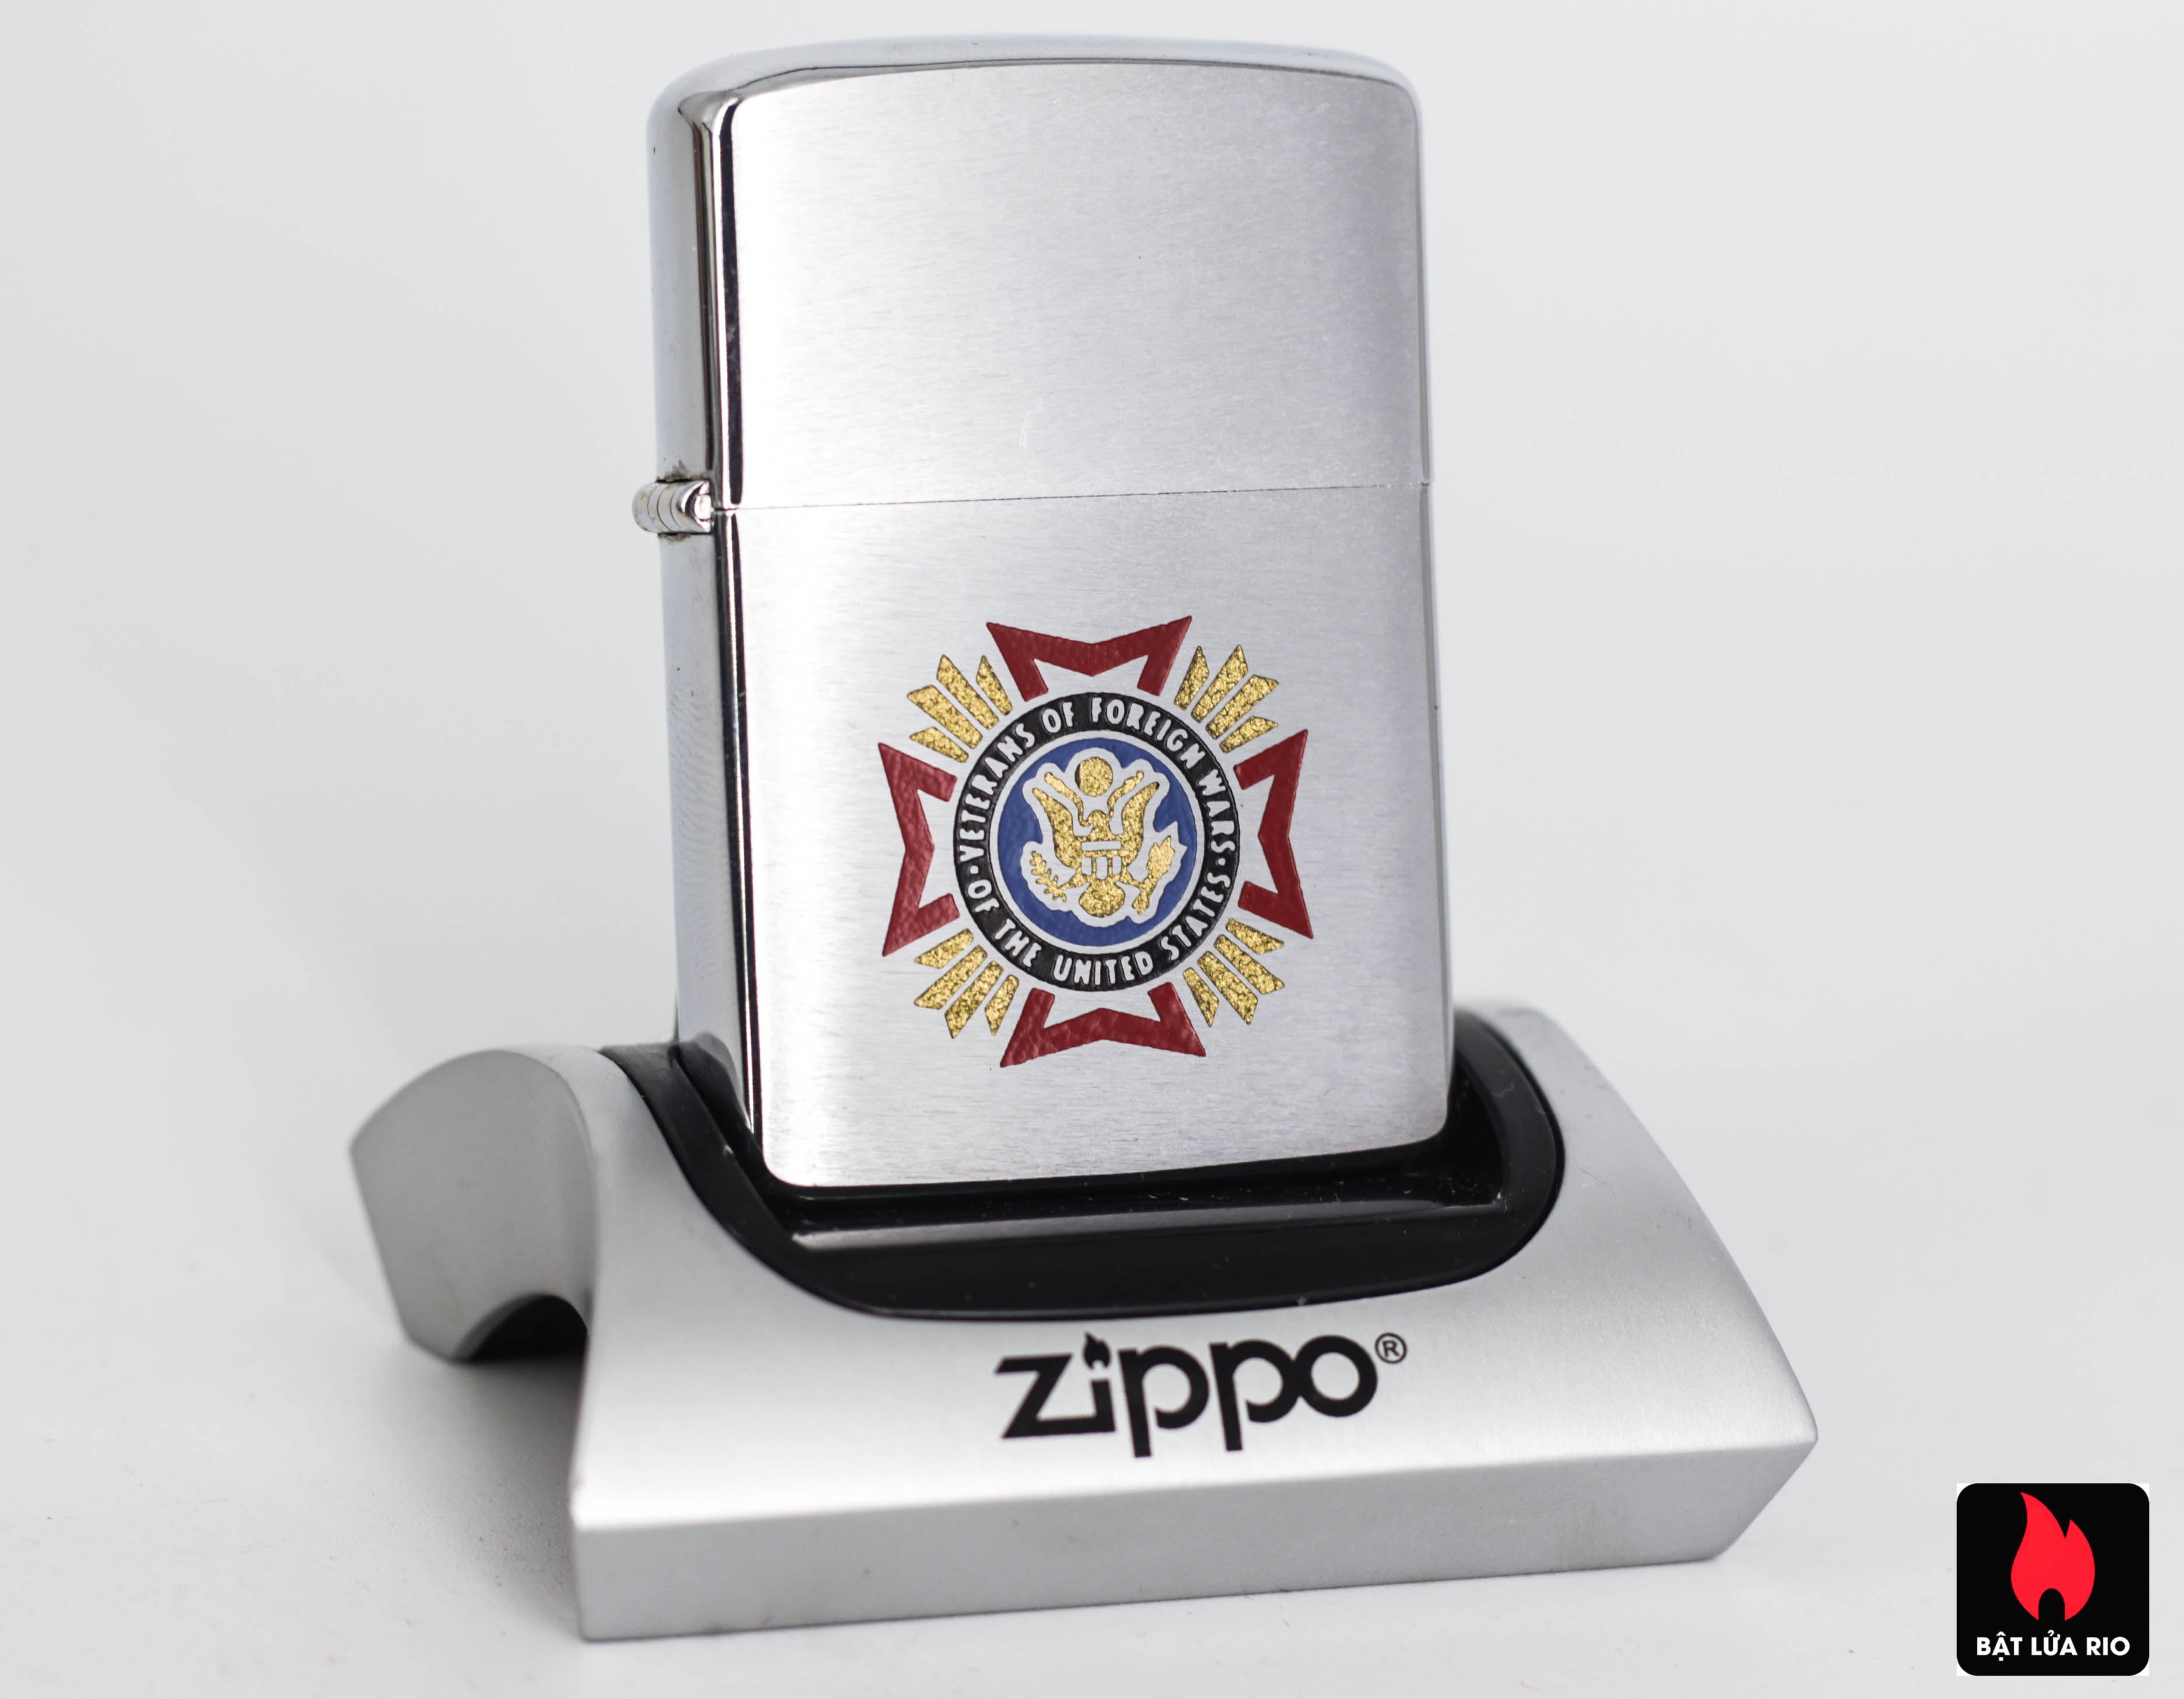 ZIPPO XƯA 1965 - VETERANS OF FOREIGN WARS